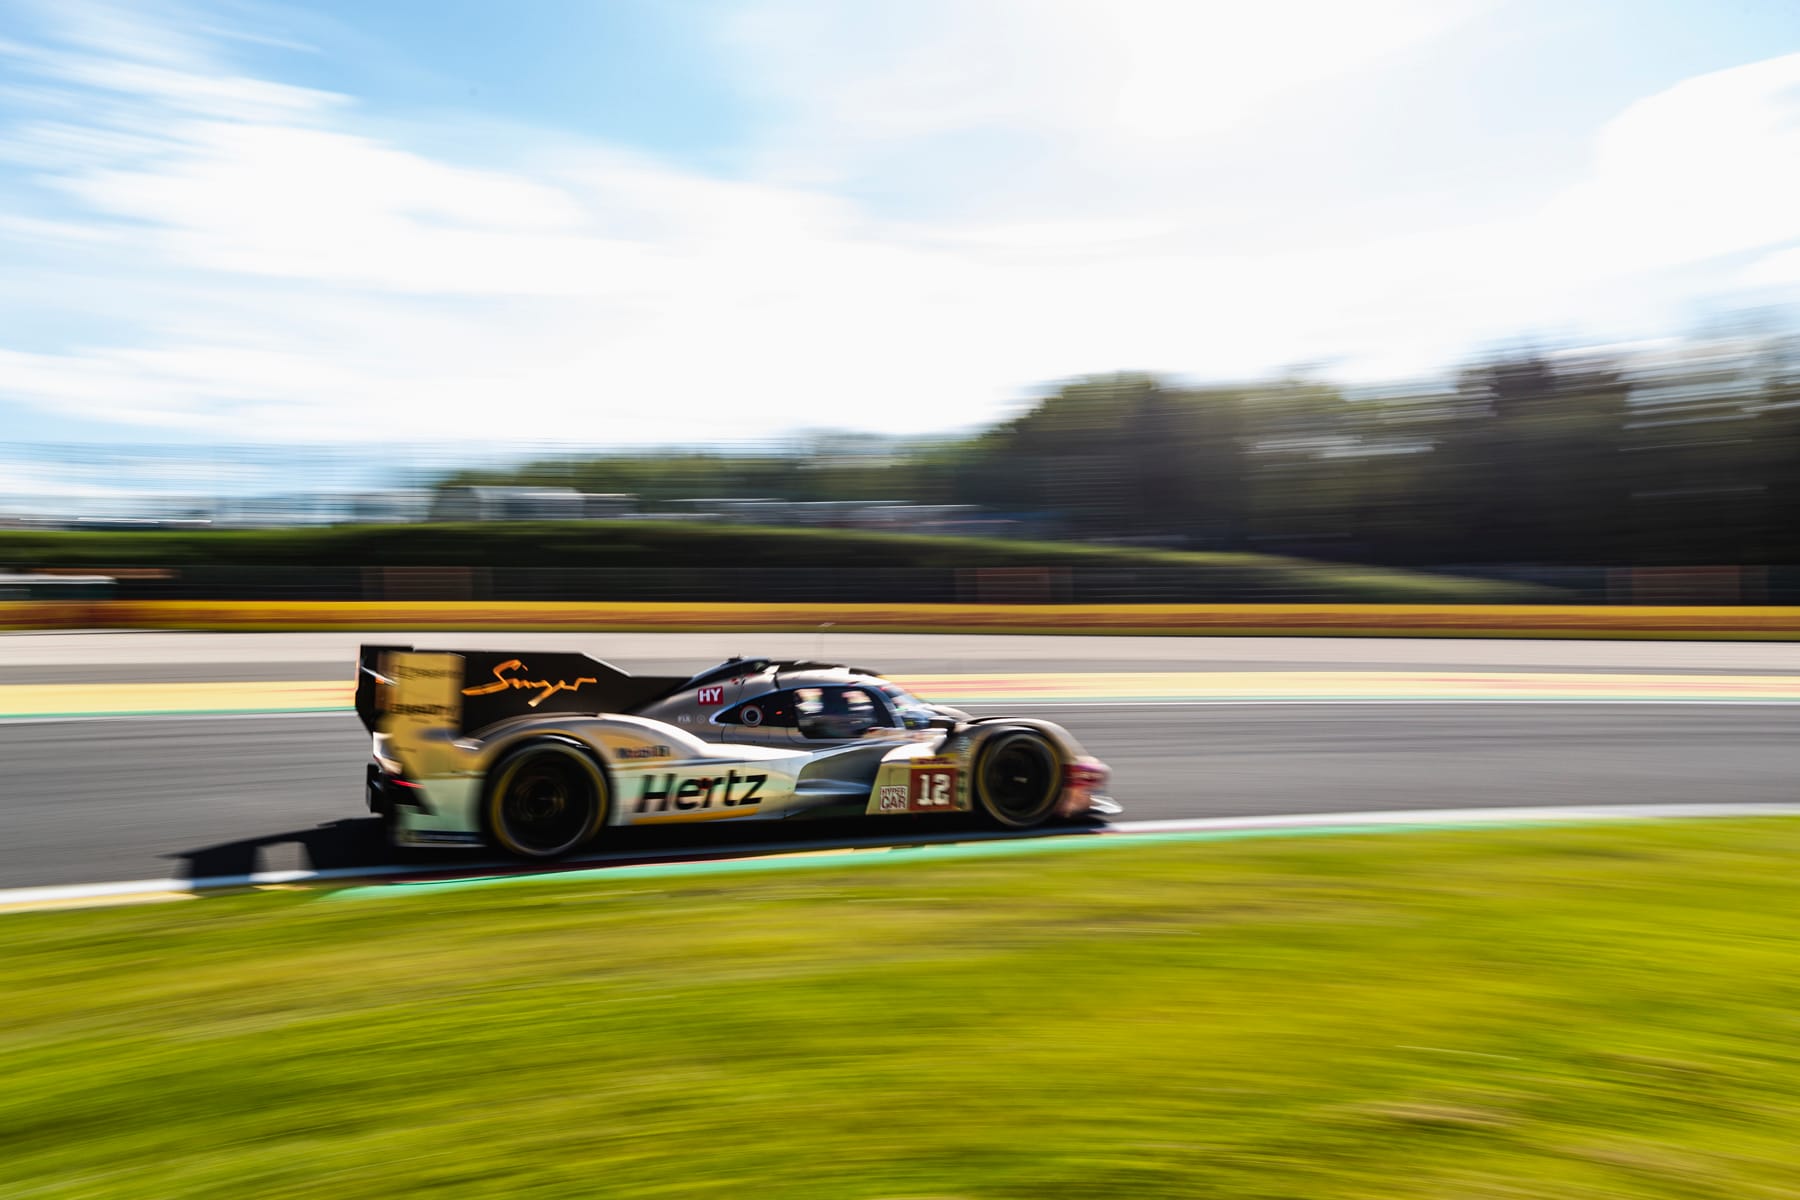 Why Jota's Spa victory was good for WEC